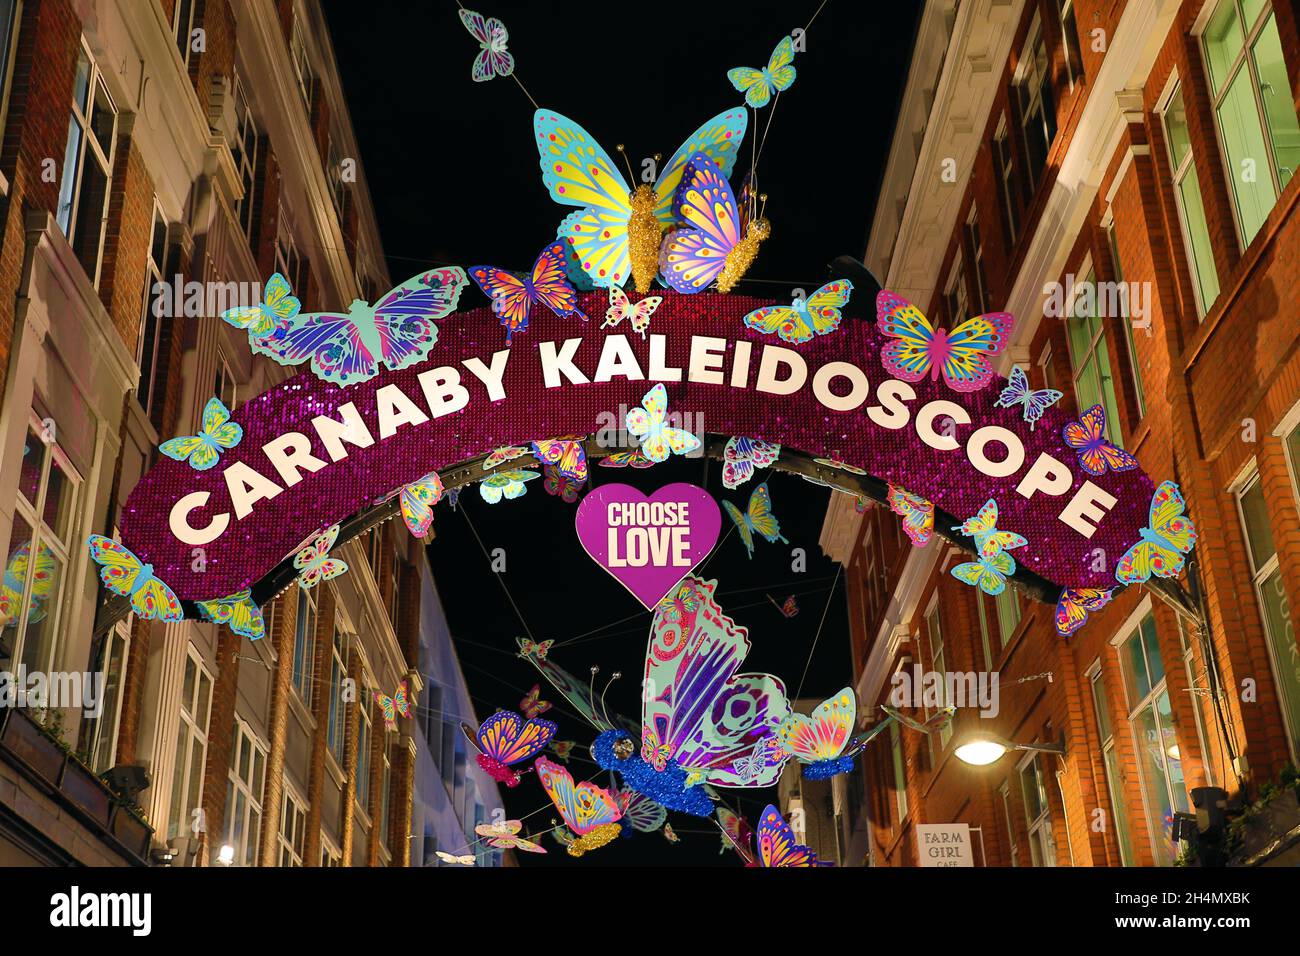 London, UK. 3rd Nov, 2021. Carnaby Street Christmas decorations in London, England with a colourful butterfly theme which is designed as a metaphor exemplifying spiritual rebirth, transformation, change and hope. the installation is in collaboration with the charity Choose Love to raise funds for refugees around the world. Credit: Paul Brown/Alamy Live News Stock Photo